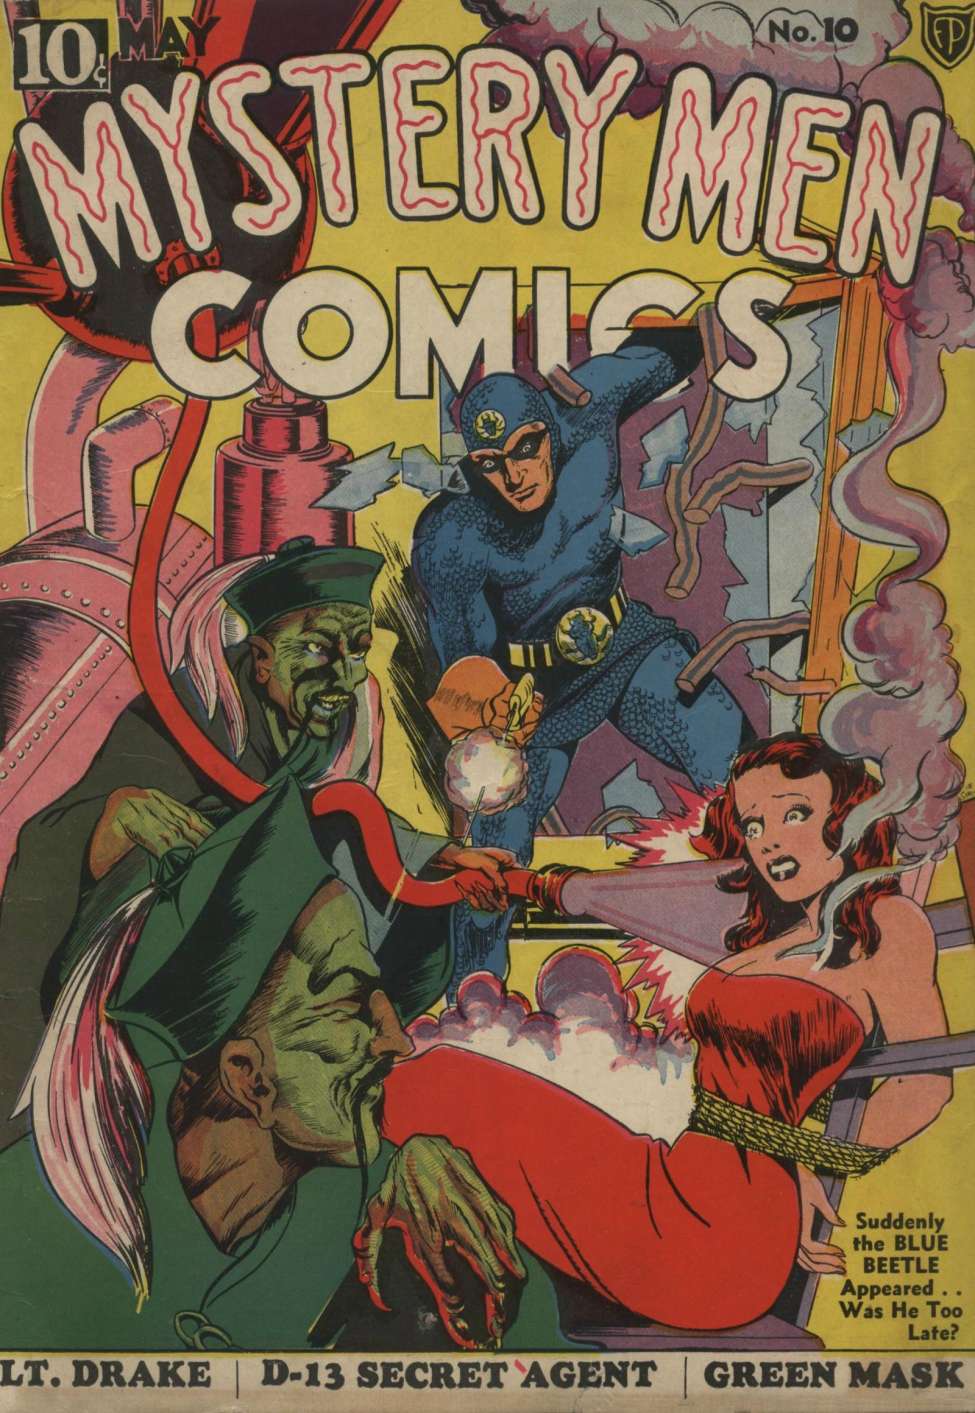 Book Cover For Mystery Men Comics 10